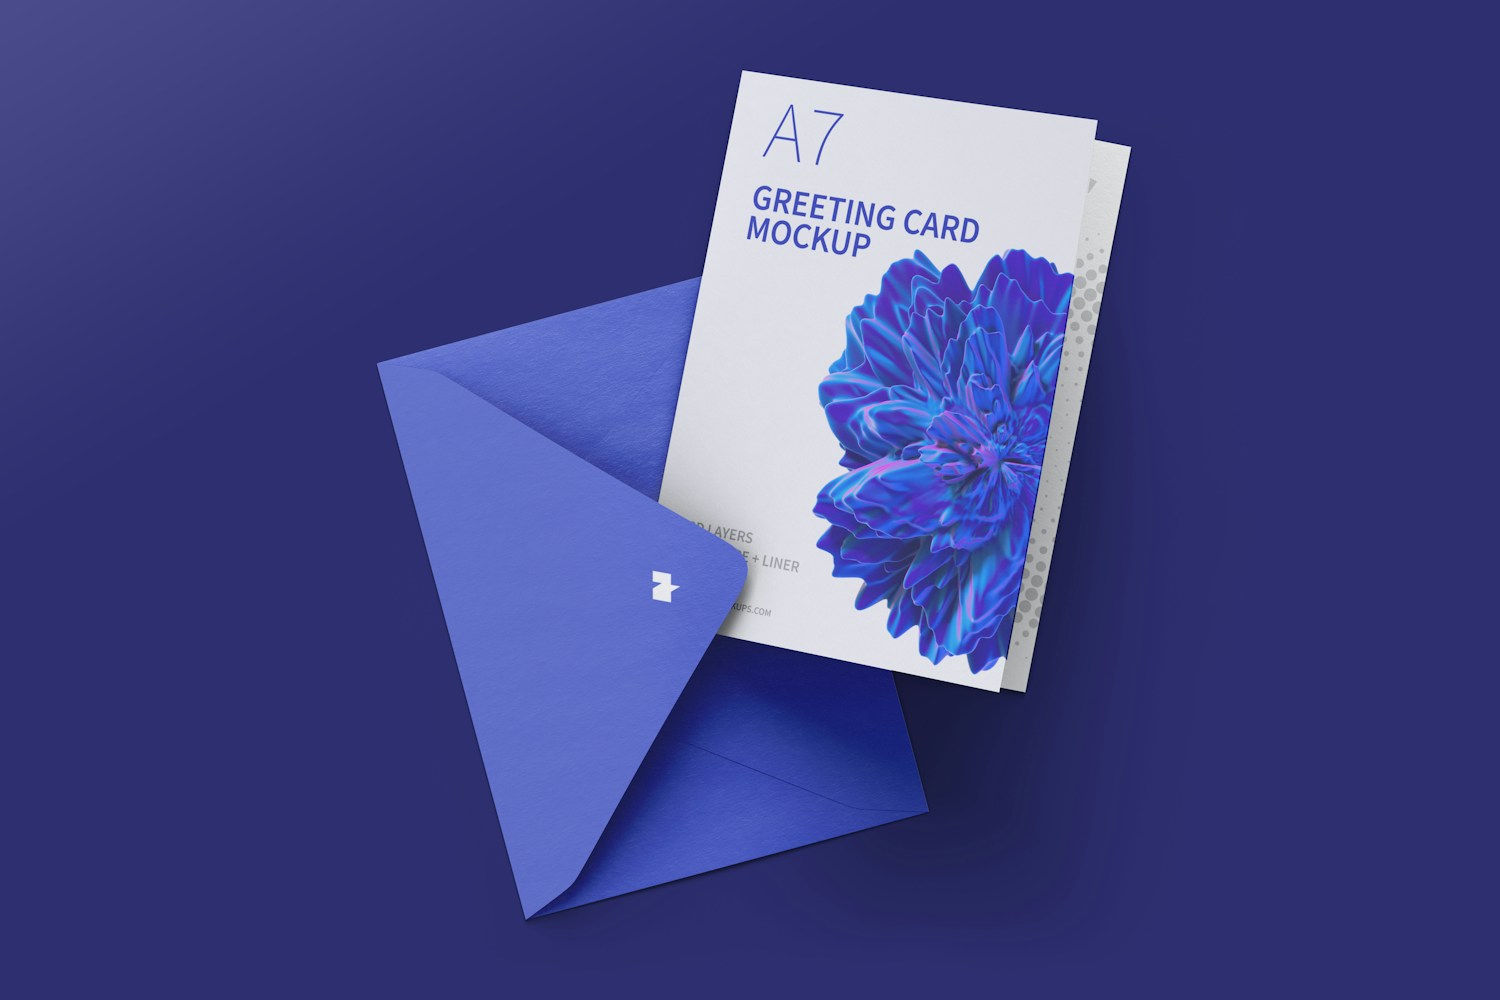 Portrait A7 Greeting Card Mockup with Envelope, Top View